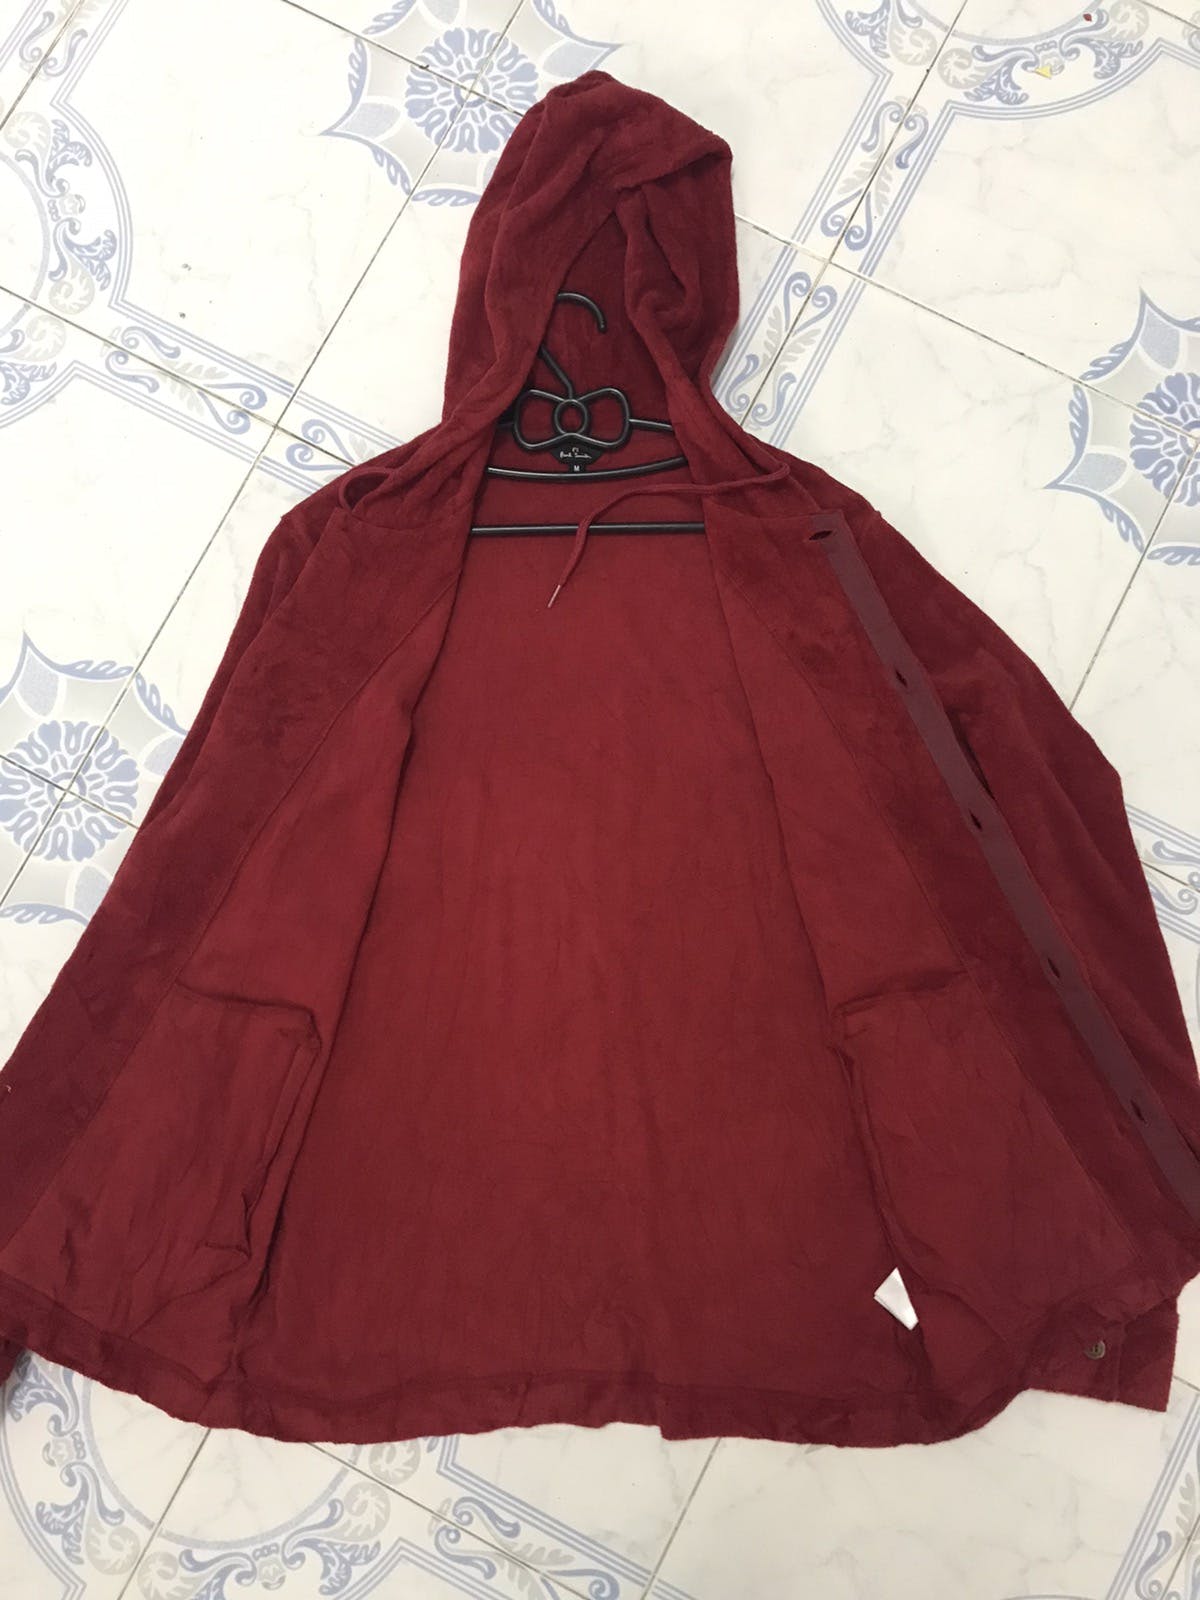 Paul Smith Button Up Hoodie Jacket Made in Japan - 16